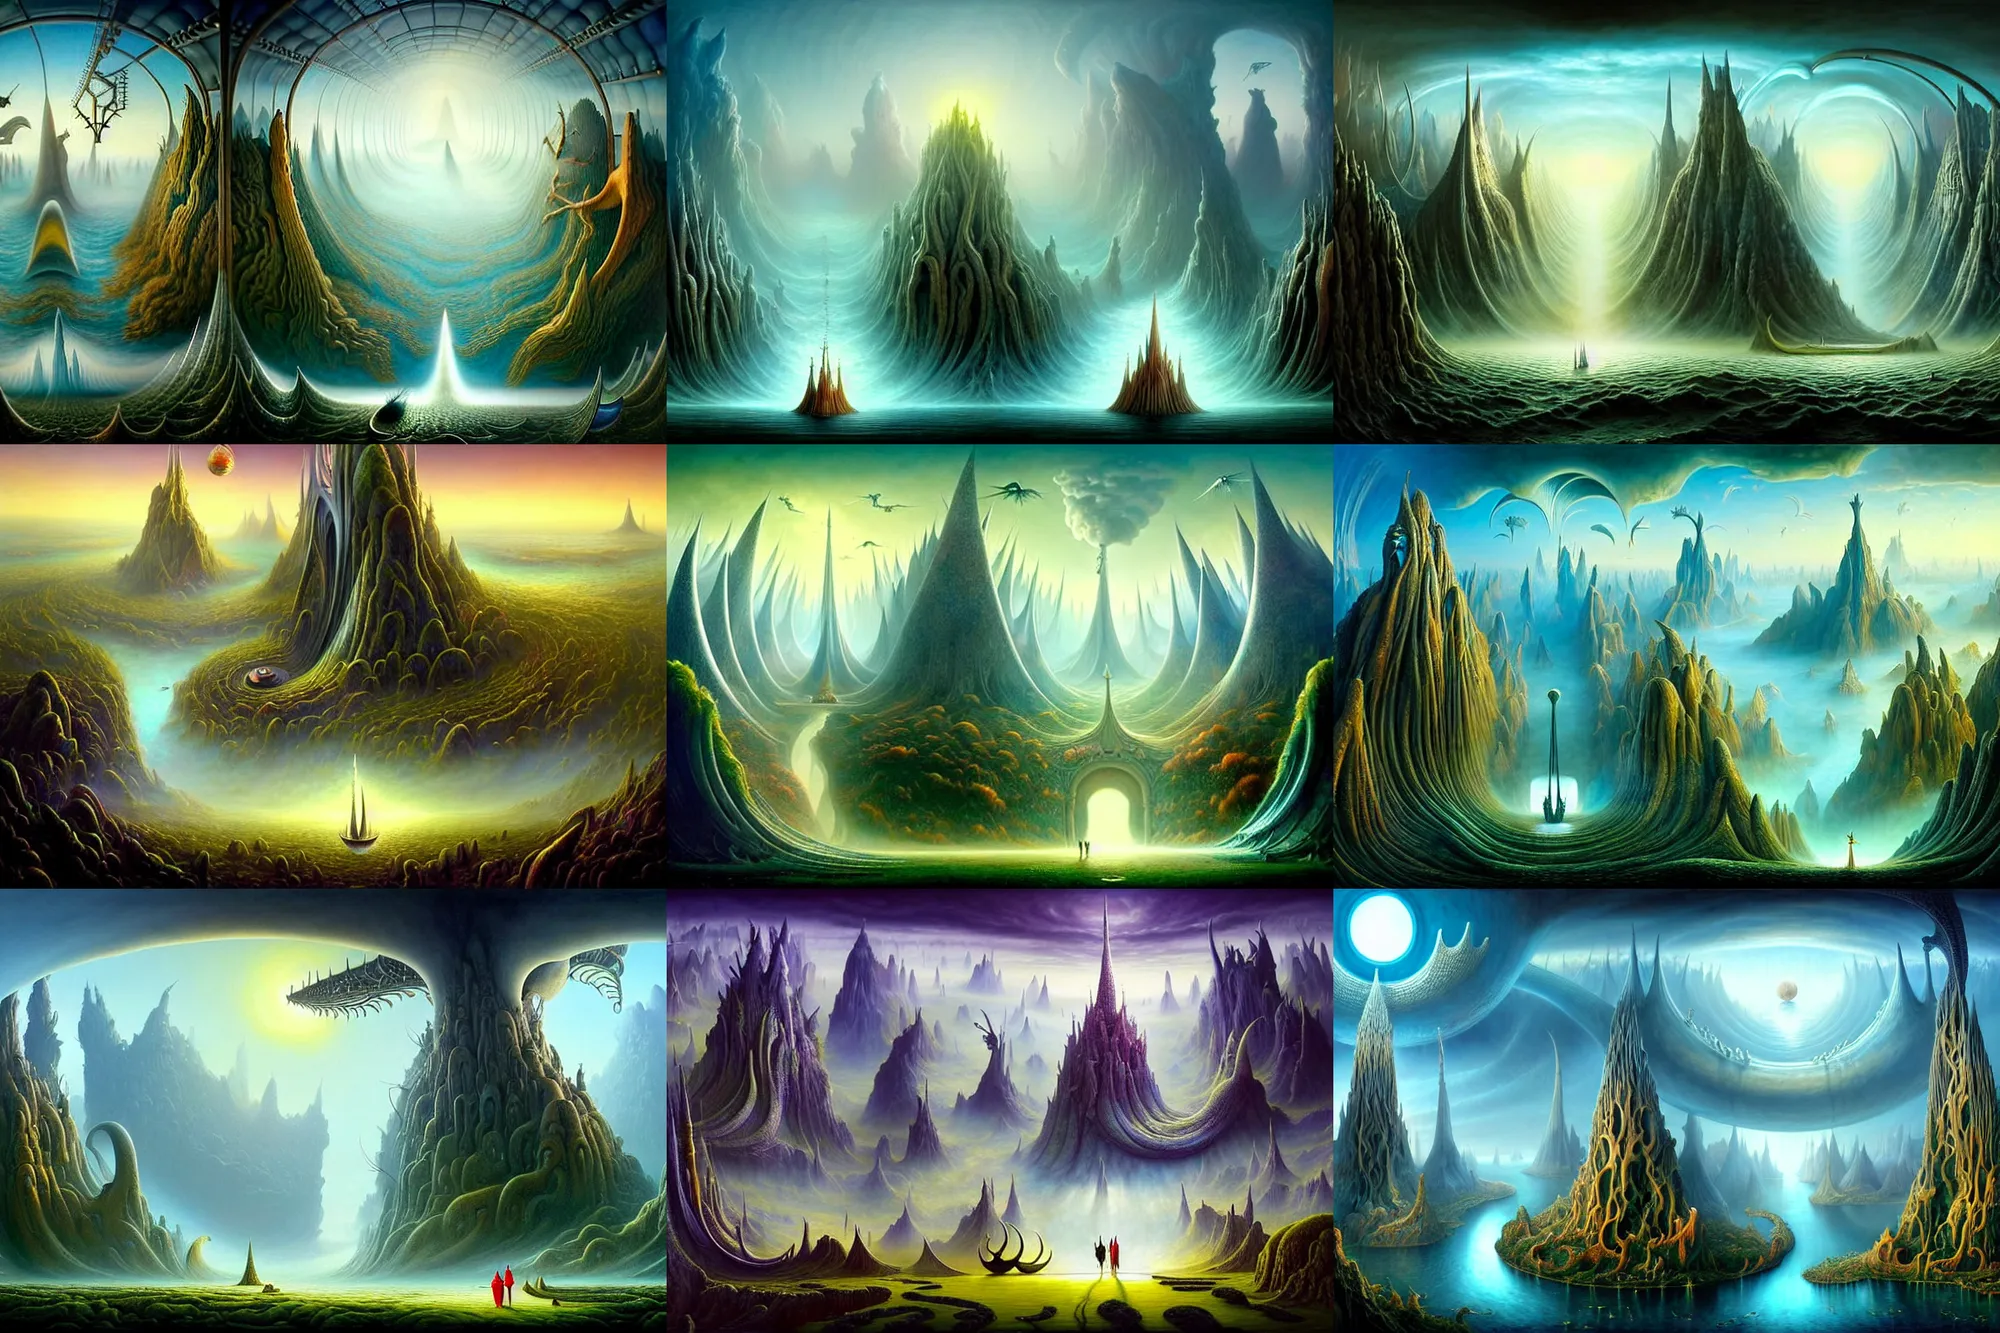 Prompt: a beautiful epic stunning amazing and insanely detailed matte painting on canvas of alien dream worlds with surreal architecture designed by Heironymous Bosch, behold the great gates of Valhalla, mega structures inspired by Heironymous Bosch's Garden of Earthly Delights, the nexus portal, vast surreal landscape and horizon by Cyril Rolando and Andrew Ferez, masterpiece!!, grand!, imaginative!!!, whimsical!!, epic scale, intricate details, sense of awe, elite, wonder, insanely complex, masterful composition, sharp focus